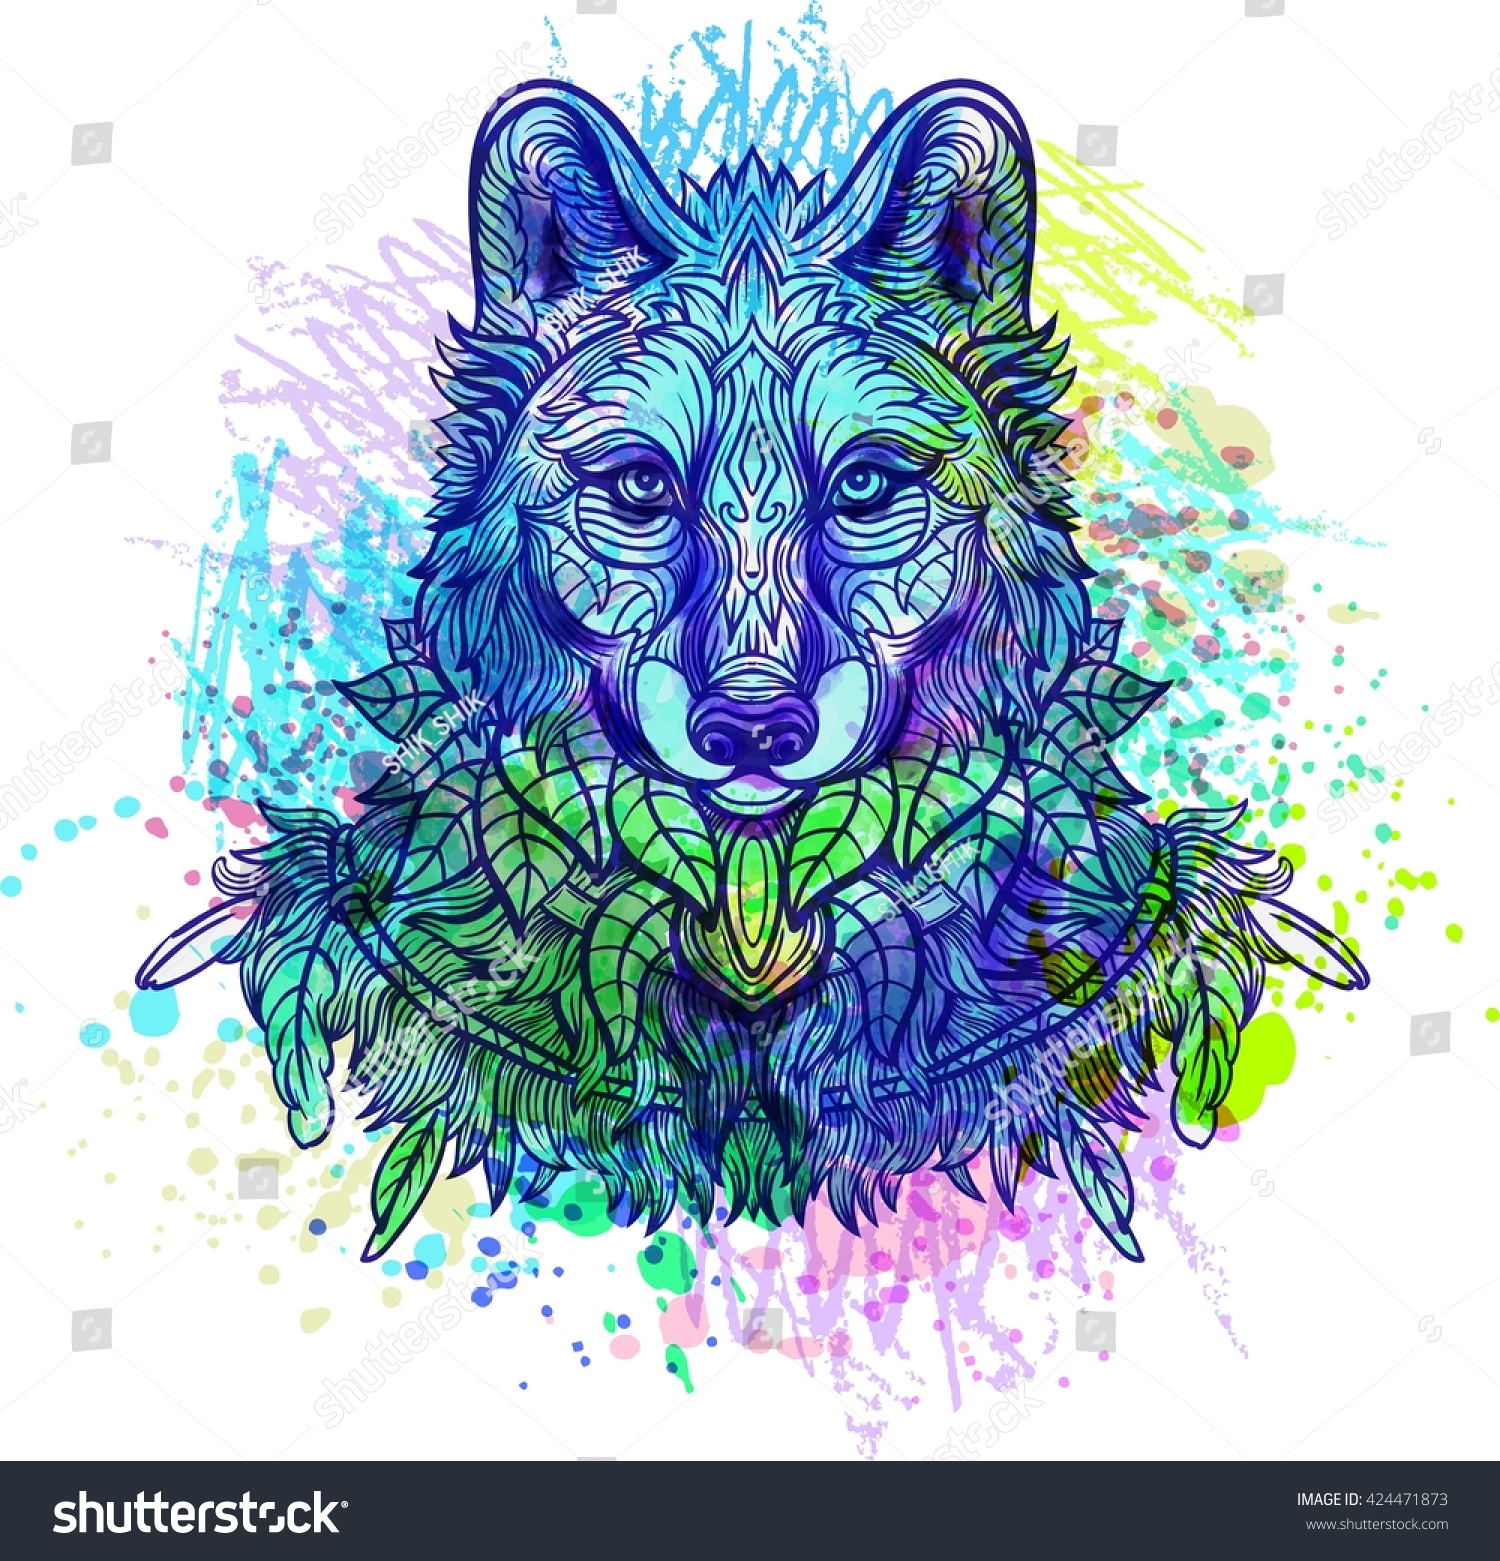 SVG of Wolf. Hand-drawn wolf side view with ethnic floral doodle pattern. Coloring page - zendala, design for tattoo, t-shirt print svg